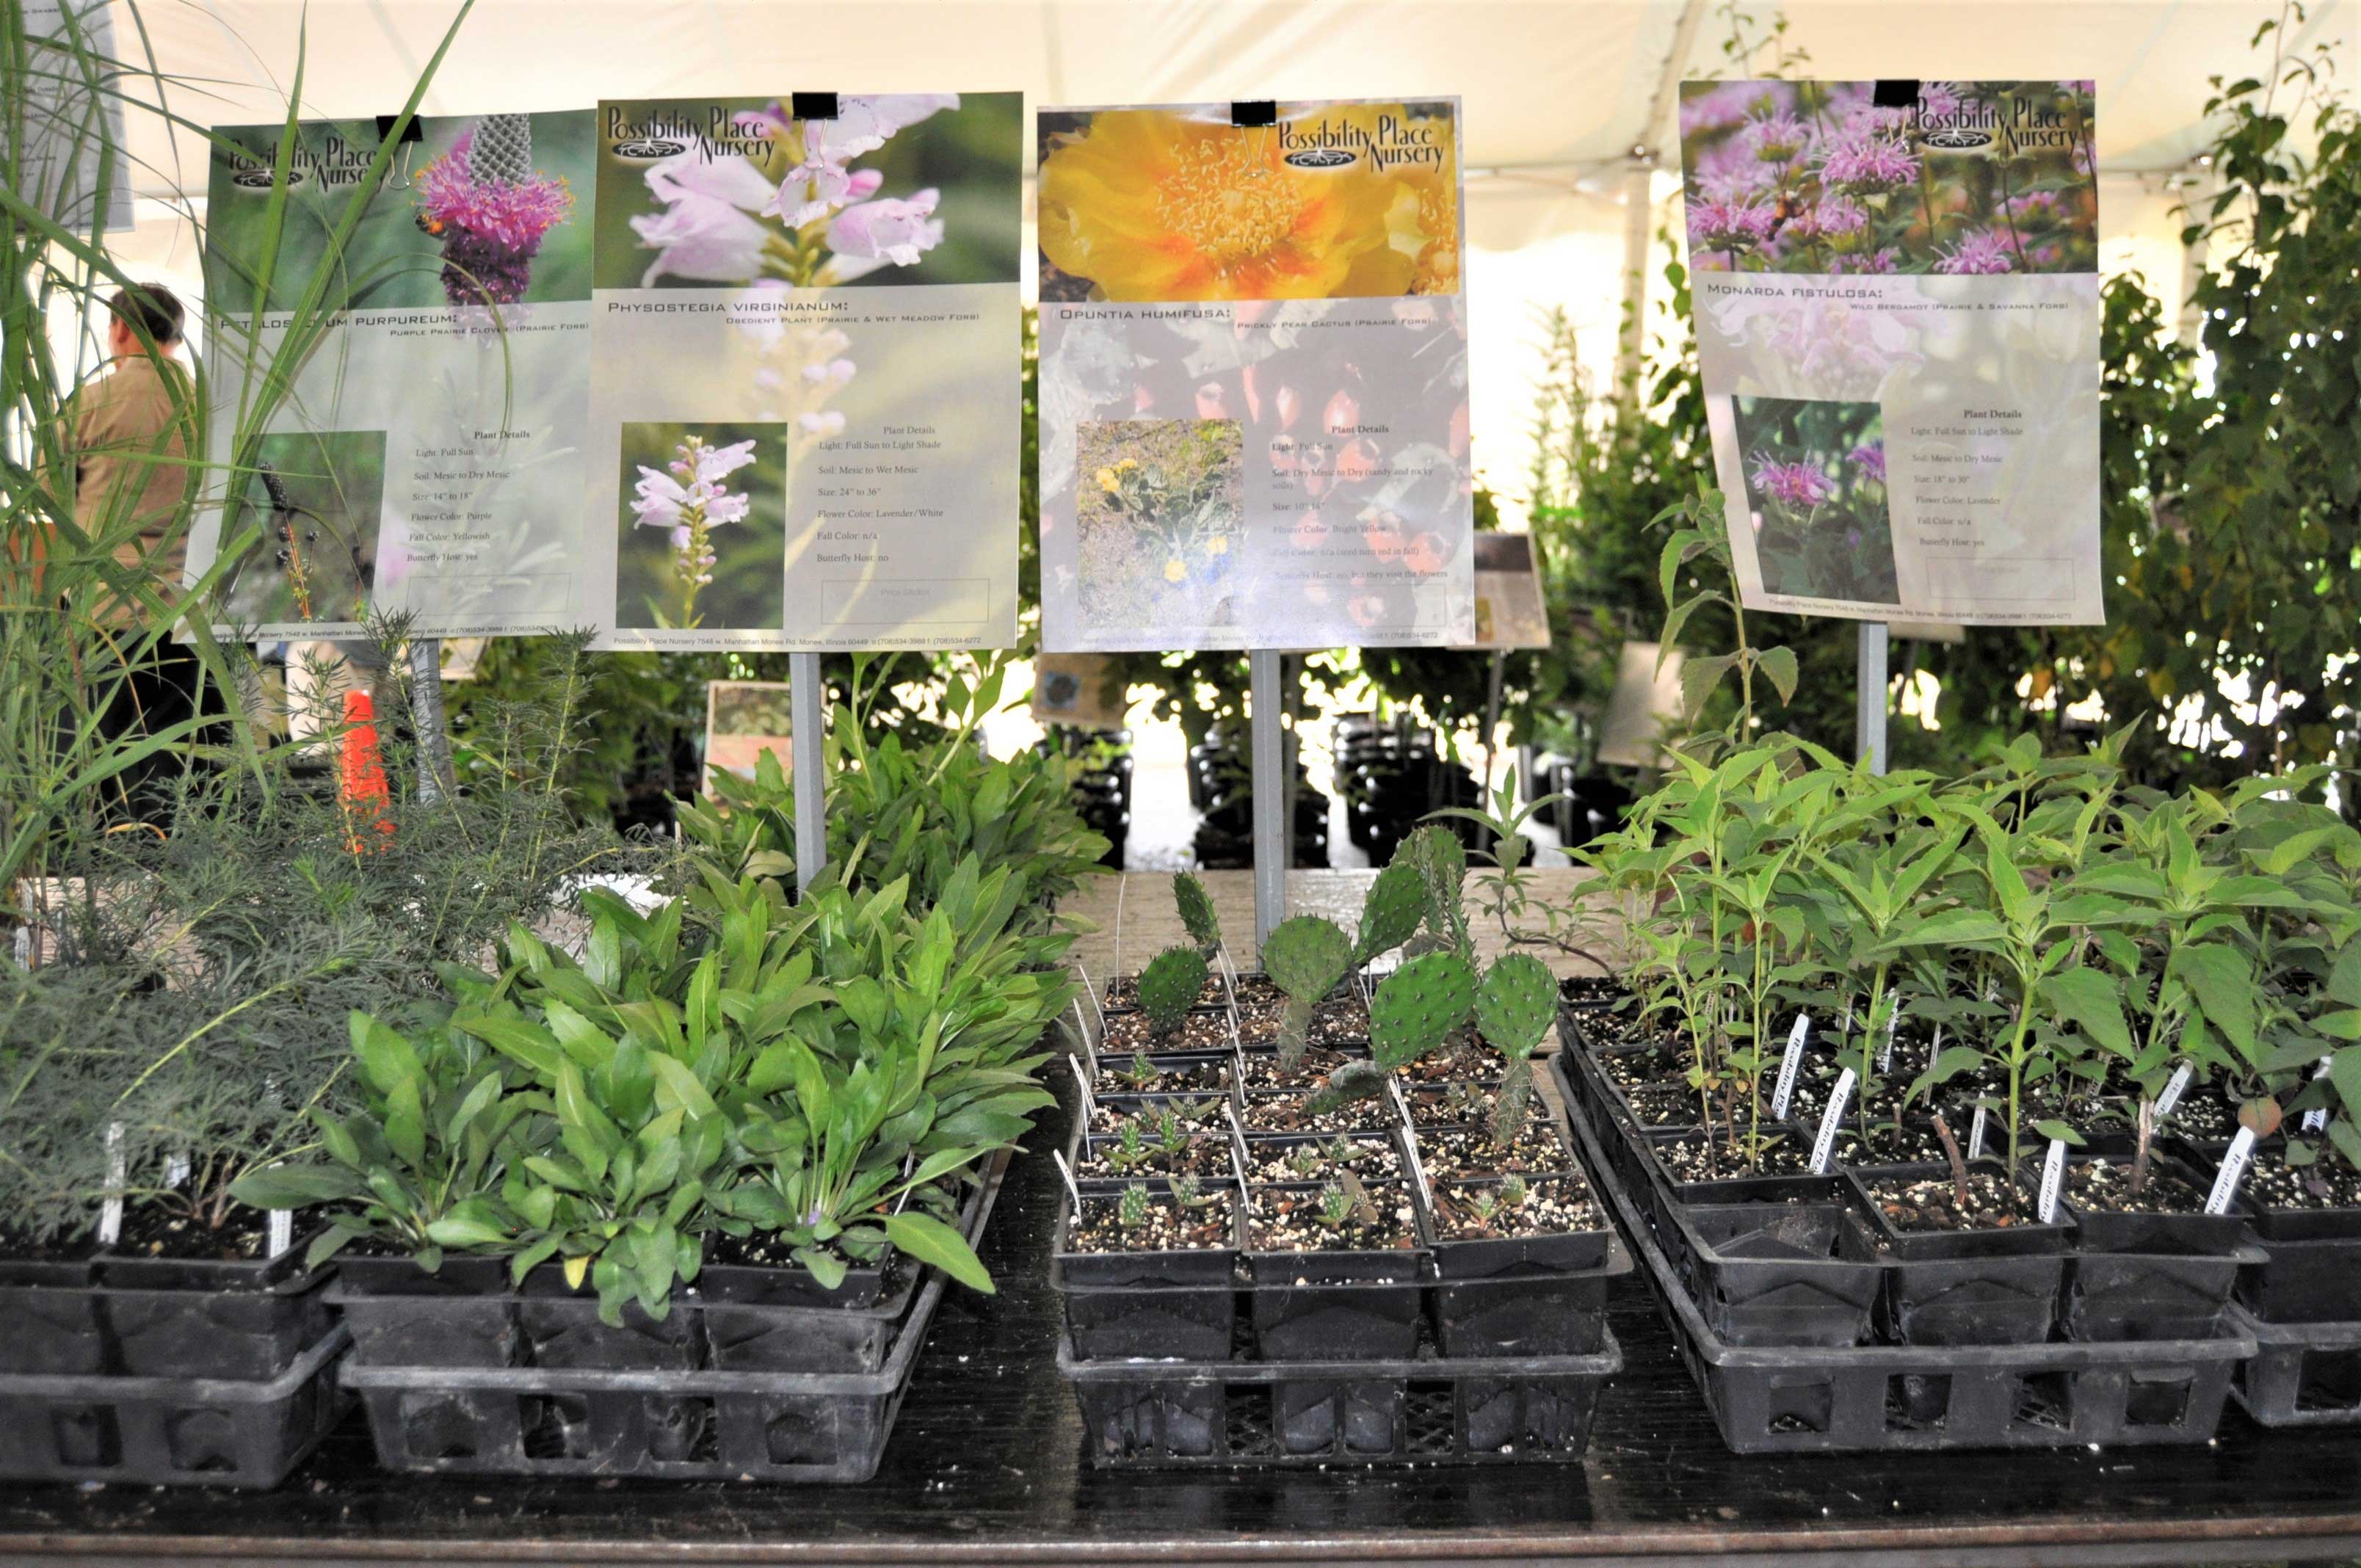 Plants available for purchase at the native plant sale.